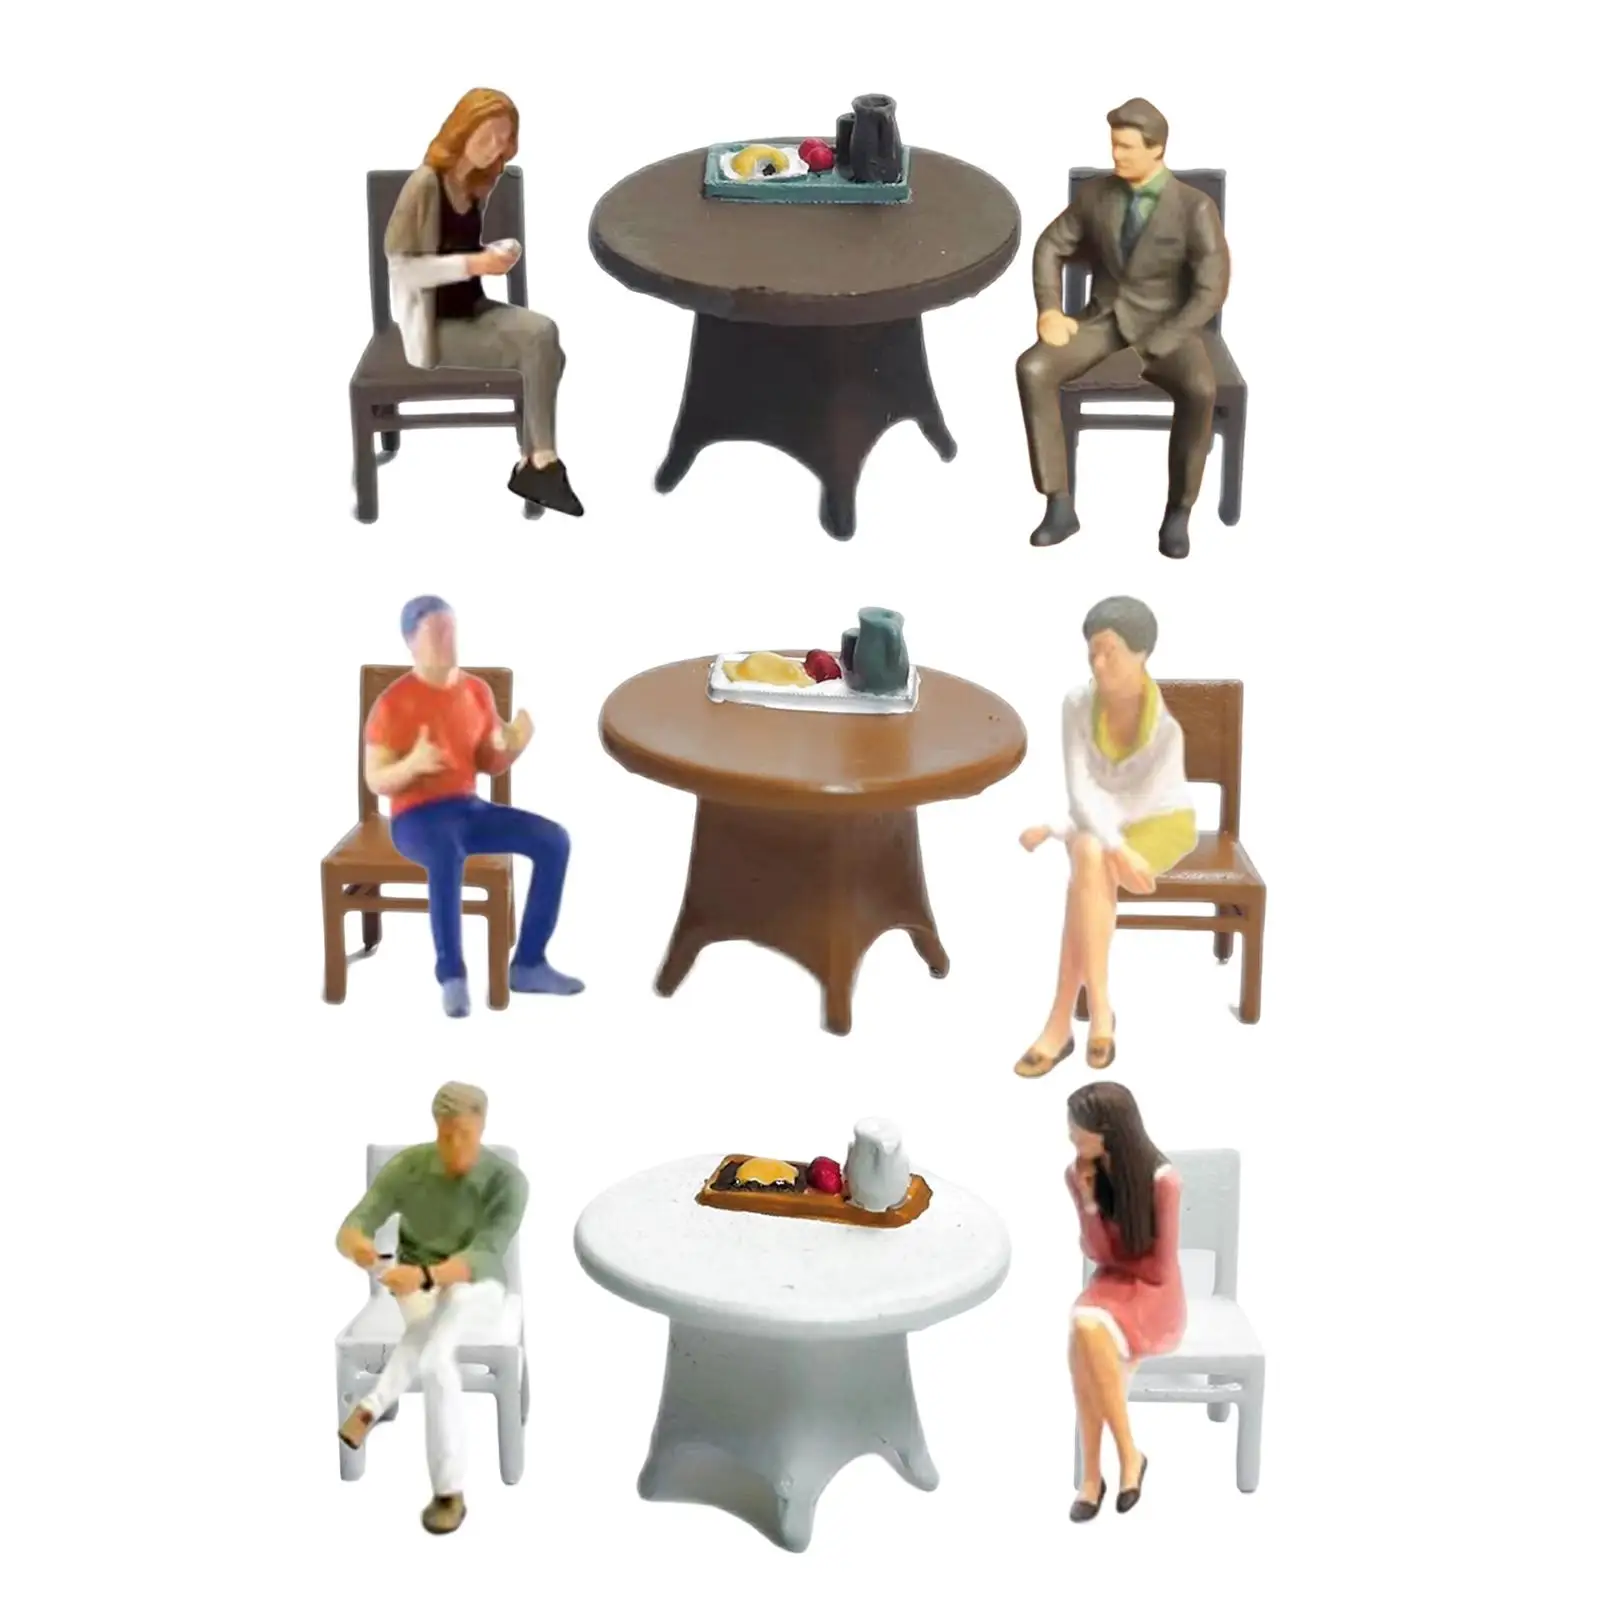 Resin 1/64 Couple Model Figure Dining Room Scenes Model Trains People Figures for Photography Props Dollhouse DIY Scene Decor